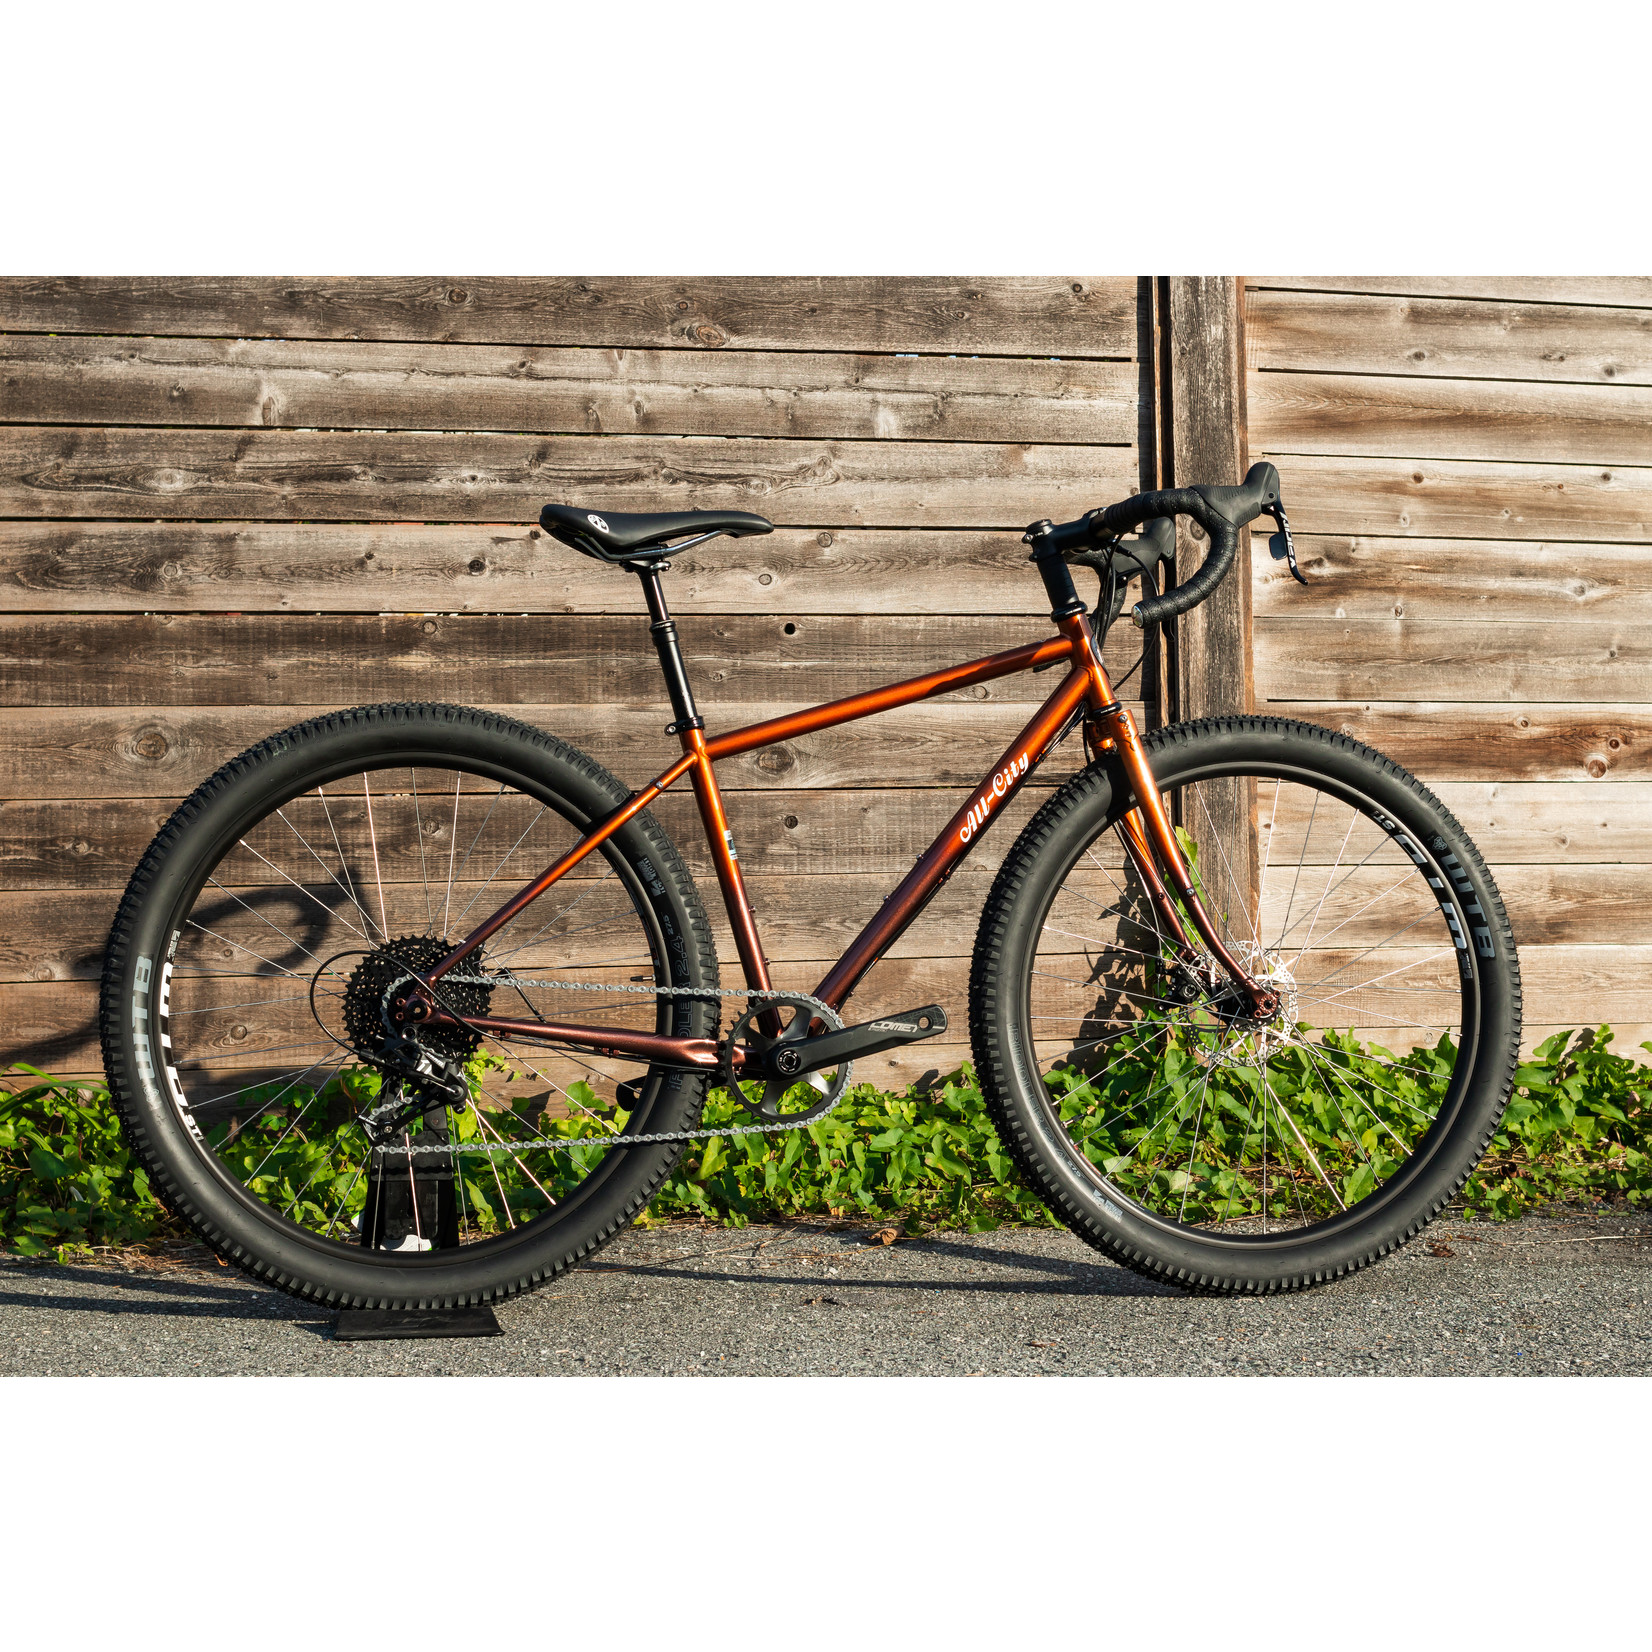 All-City All-City Gorilla Monsoon Apex 1 Root Beer Keg Complete